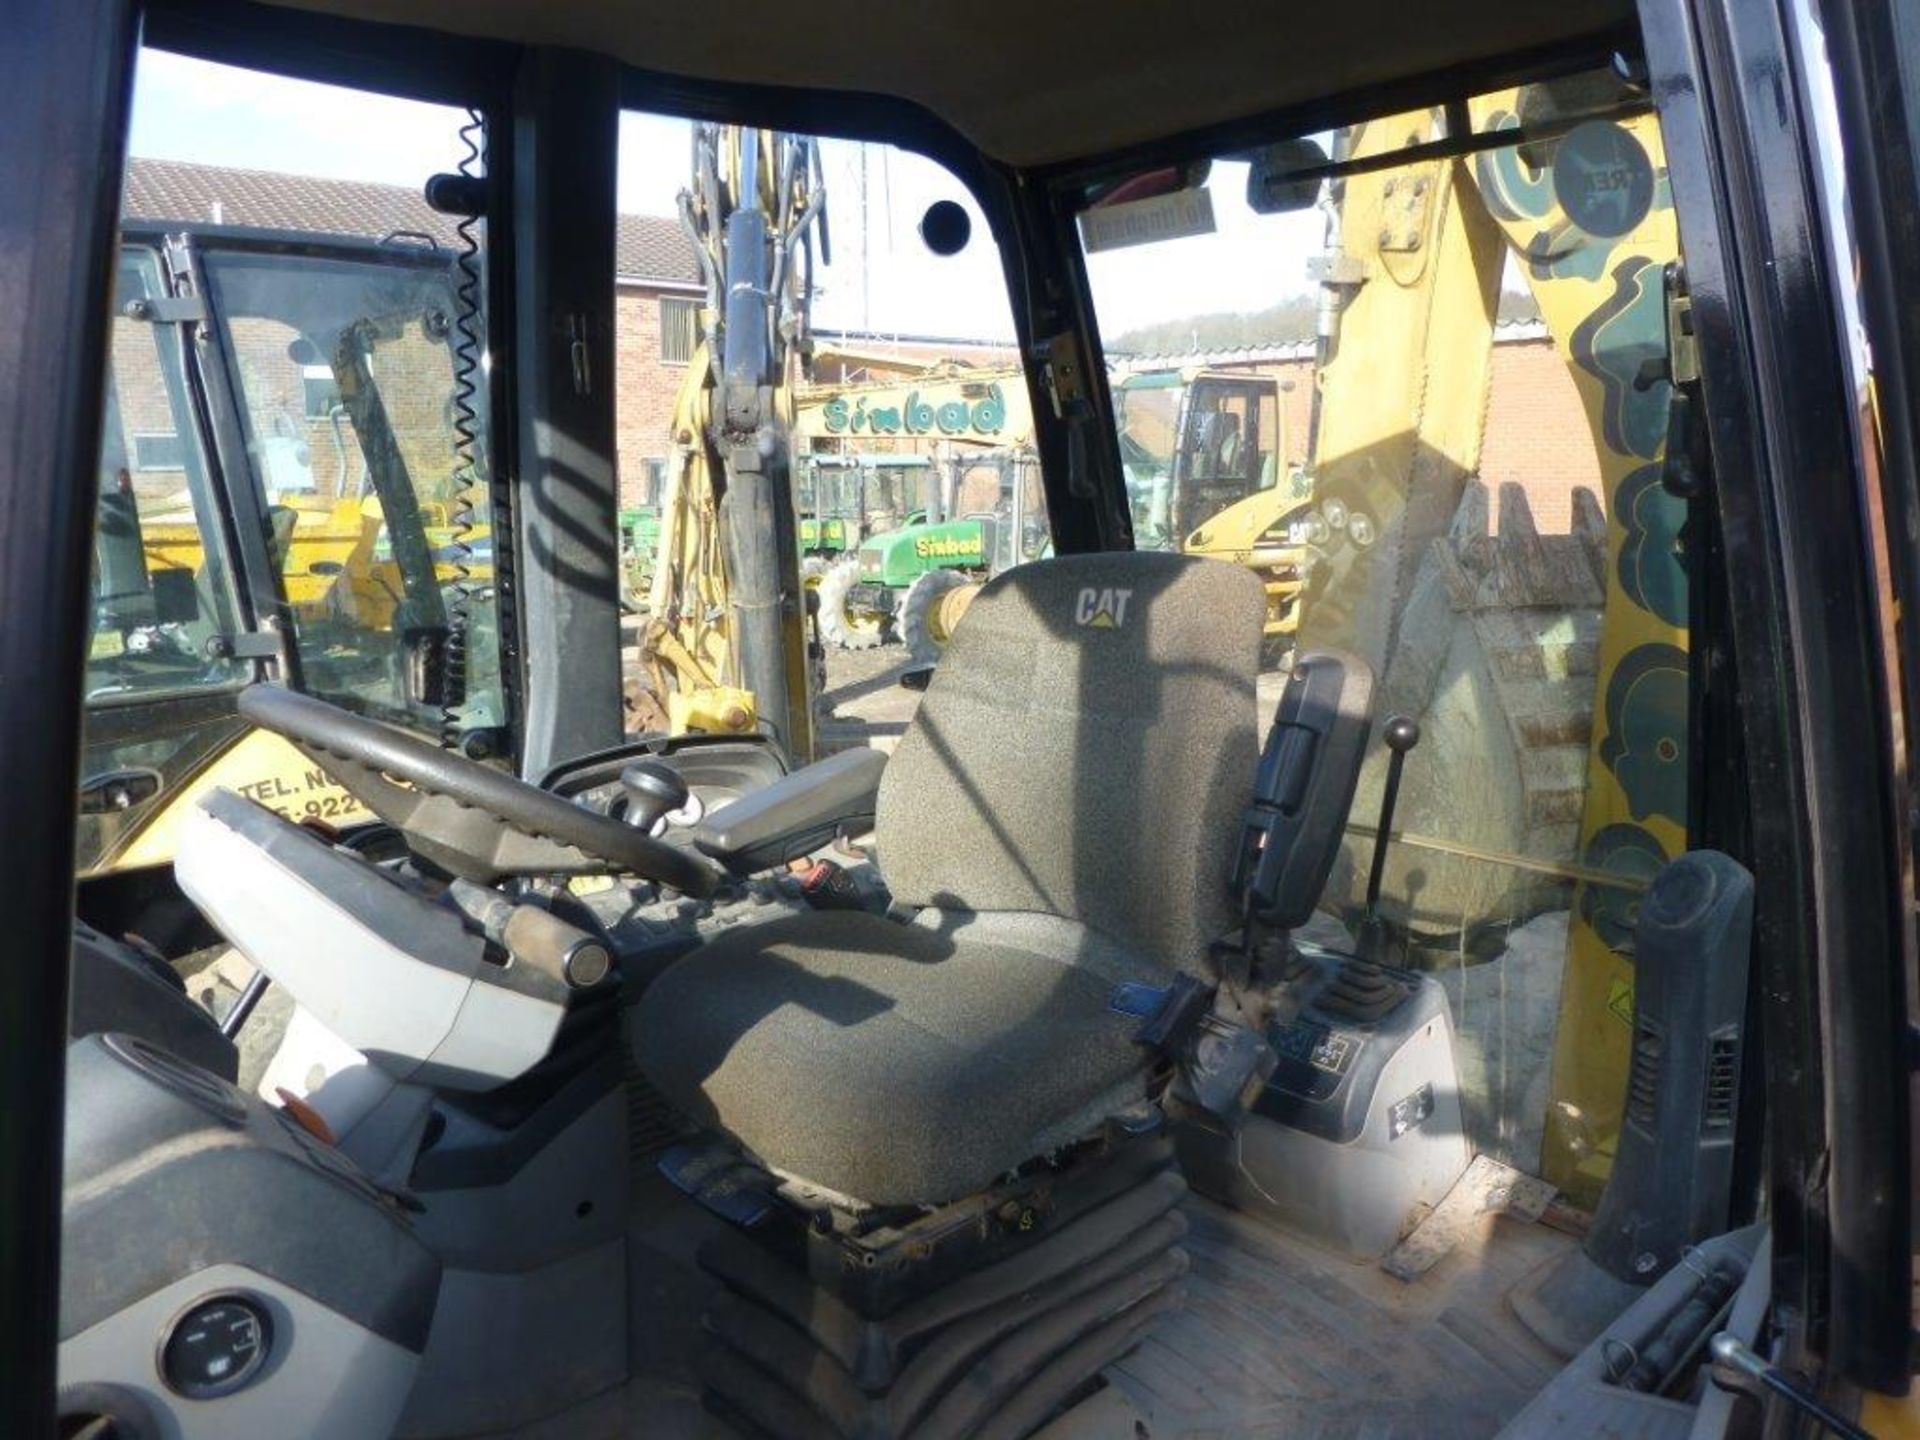 Caterpillar 428E 4x4 backhoe loader (2007), indicated hours 5530.3, PIN no. CAT0428ELSNL00912, - Image 7 of 7